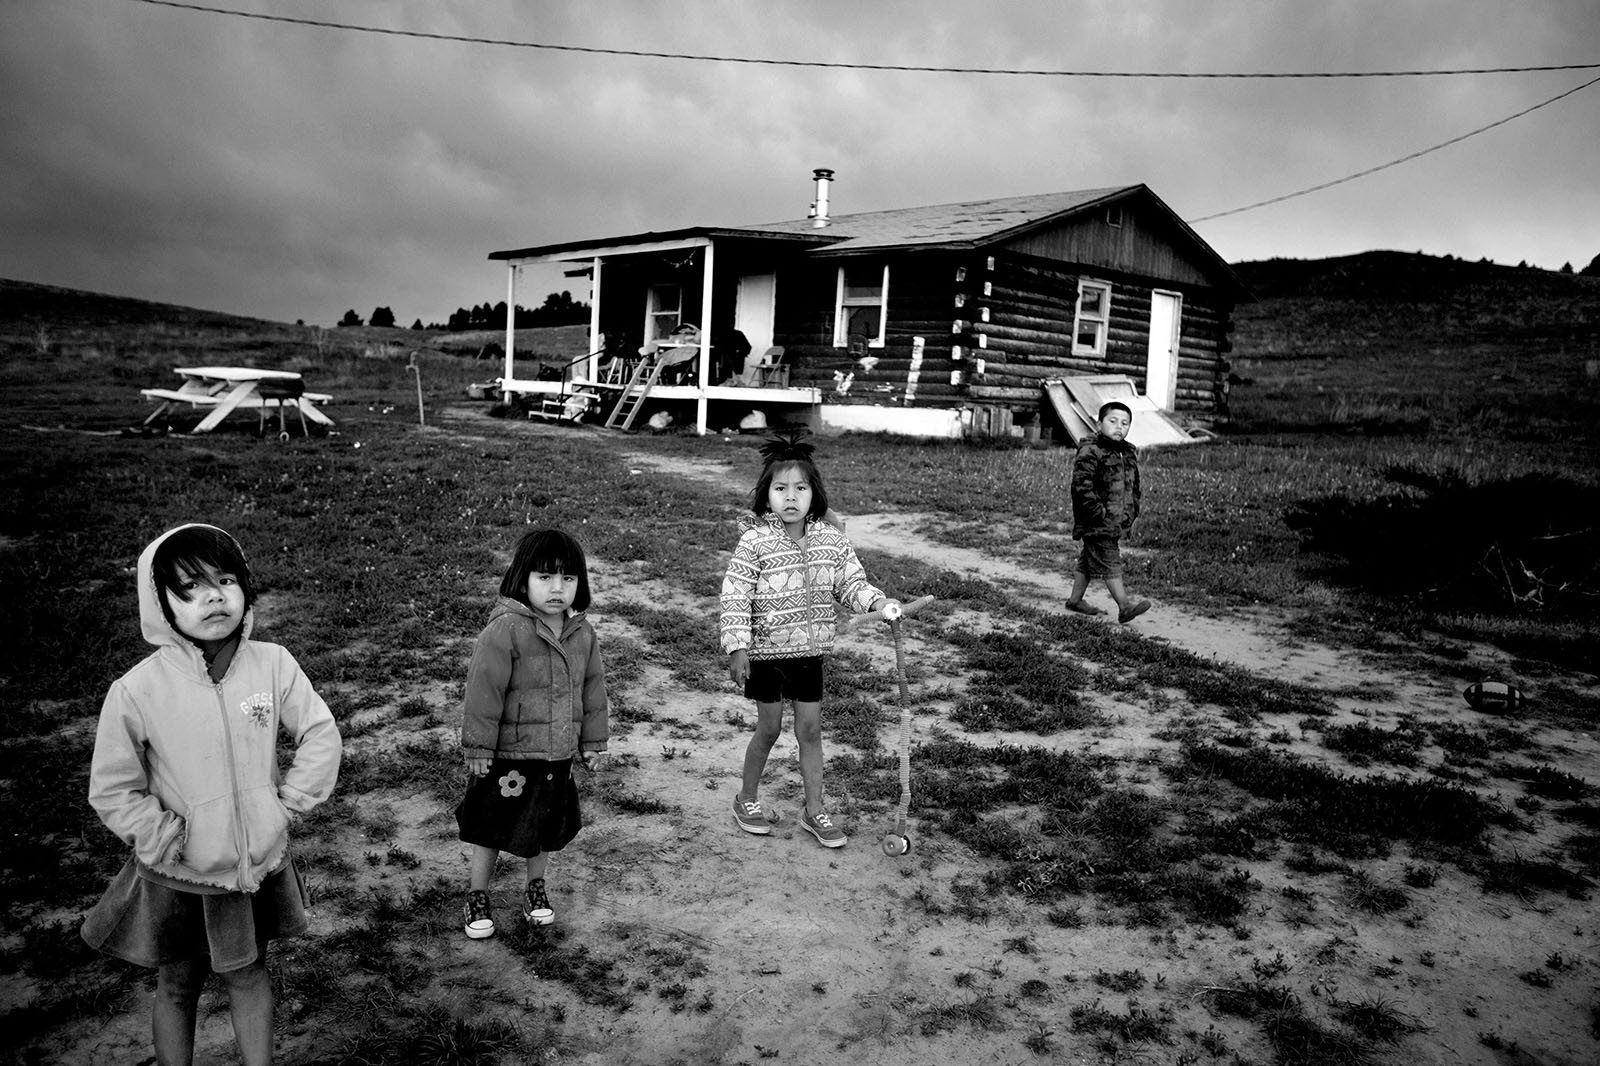 49% of the population in Pine Ridge live below the poverty line.